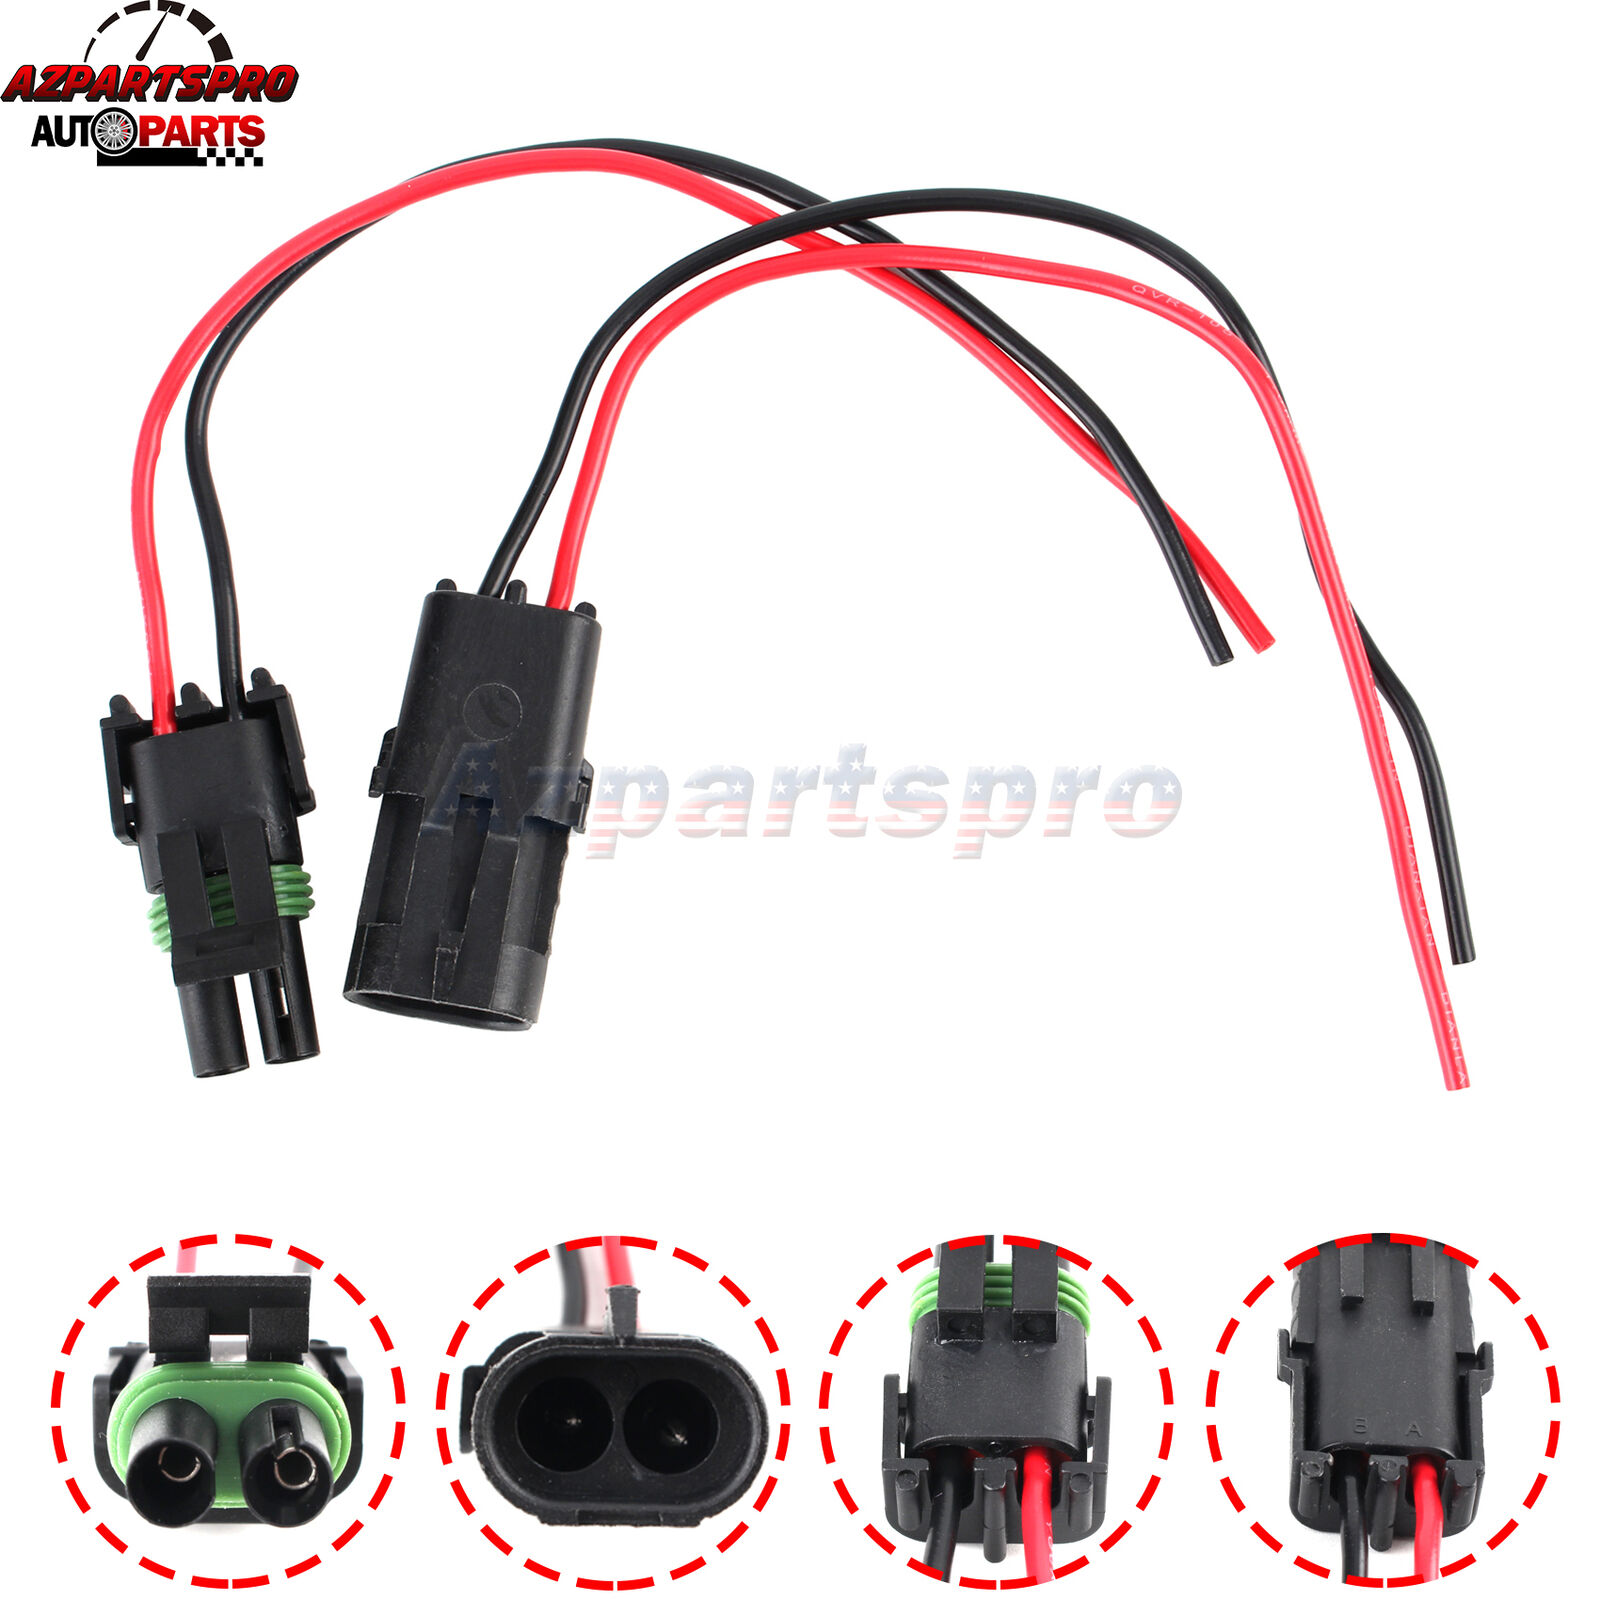 Wiring Harness Electrical Connector For Harmar Outlander Lifts CAR+Lift SIDE MM1